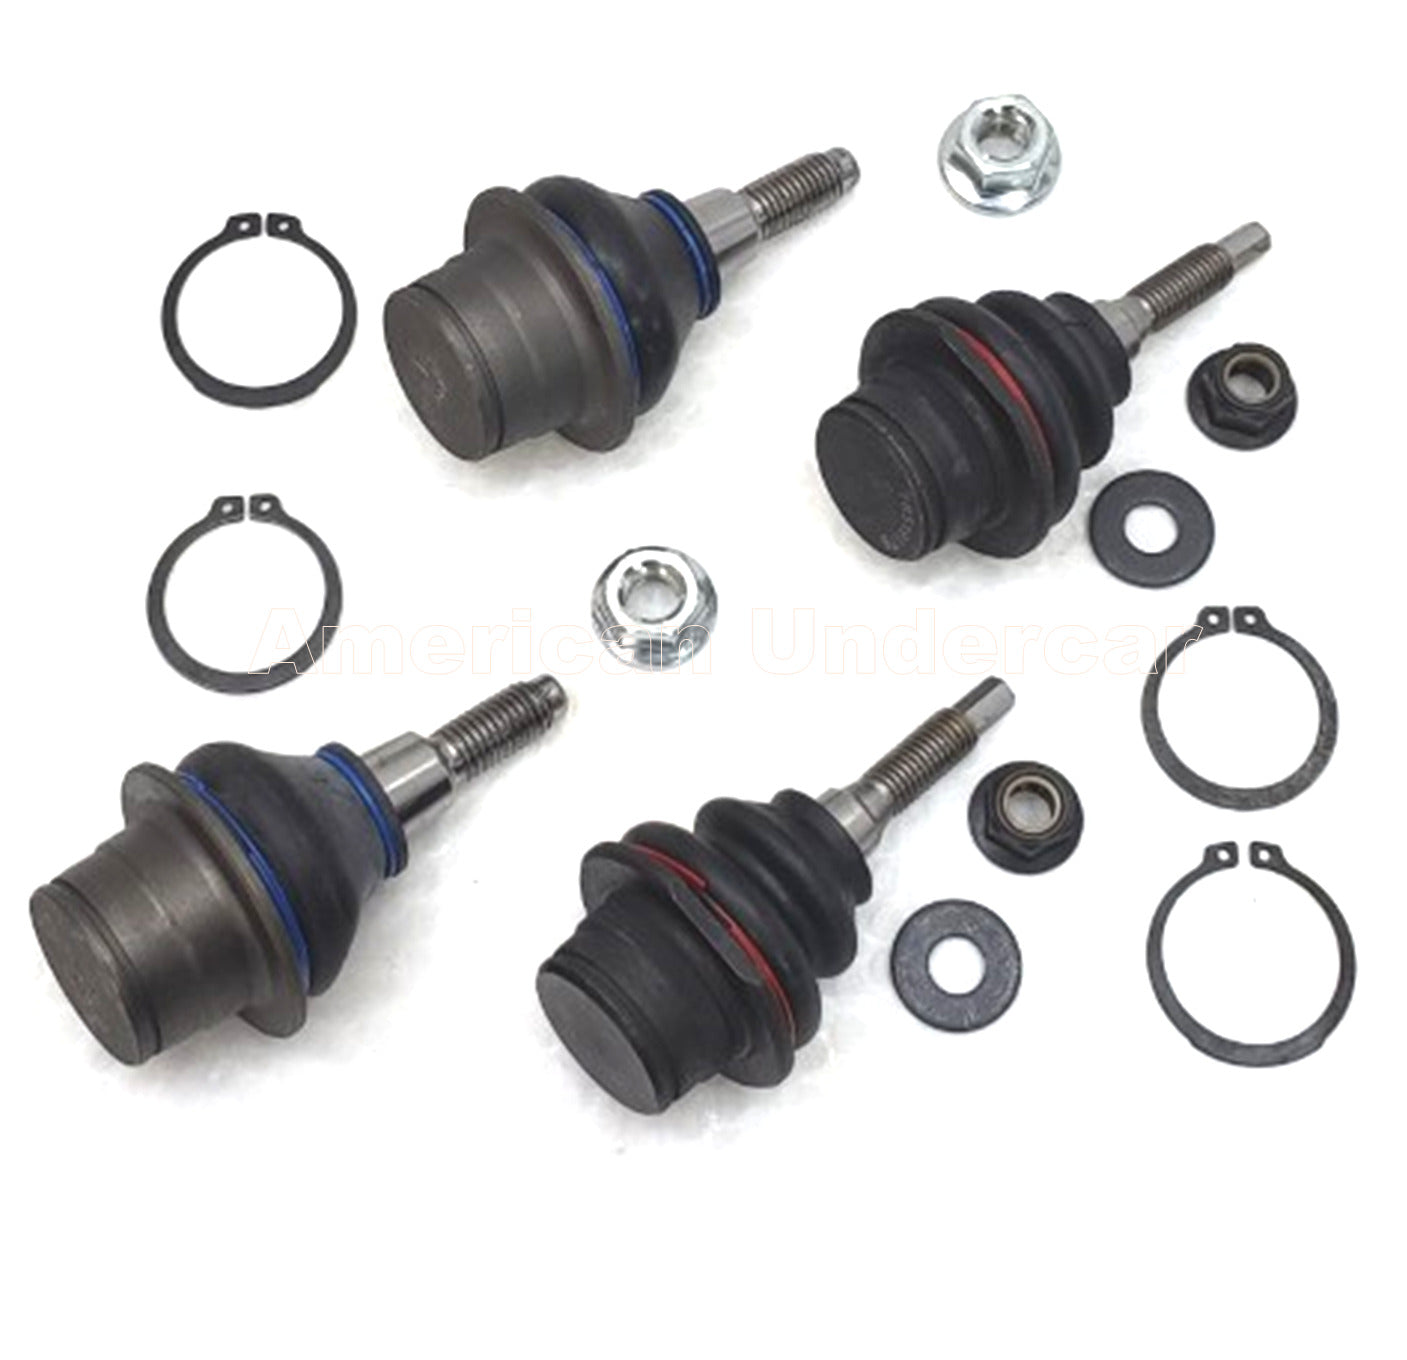 Lifetime Ball Joints Upper and Lower Suspension Kit for 2018-2021 Ford Expedition 4x4